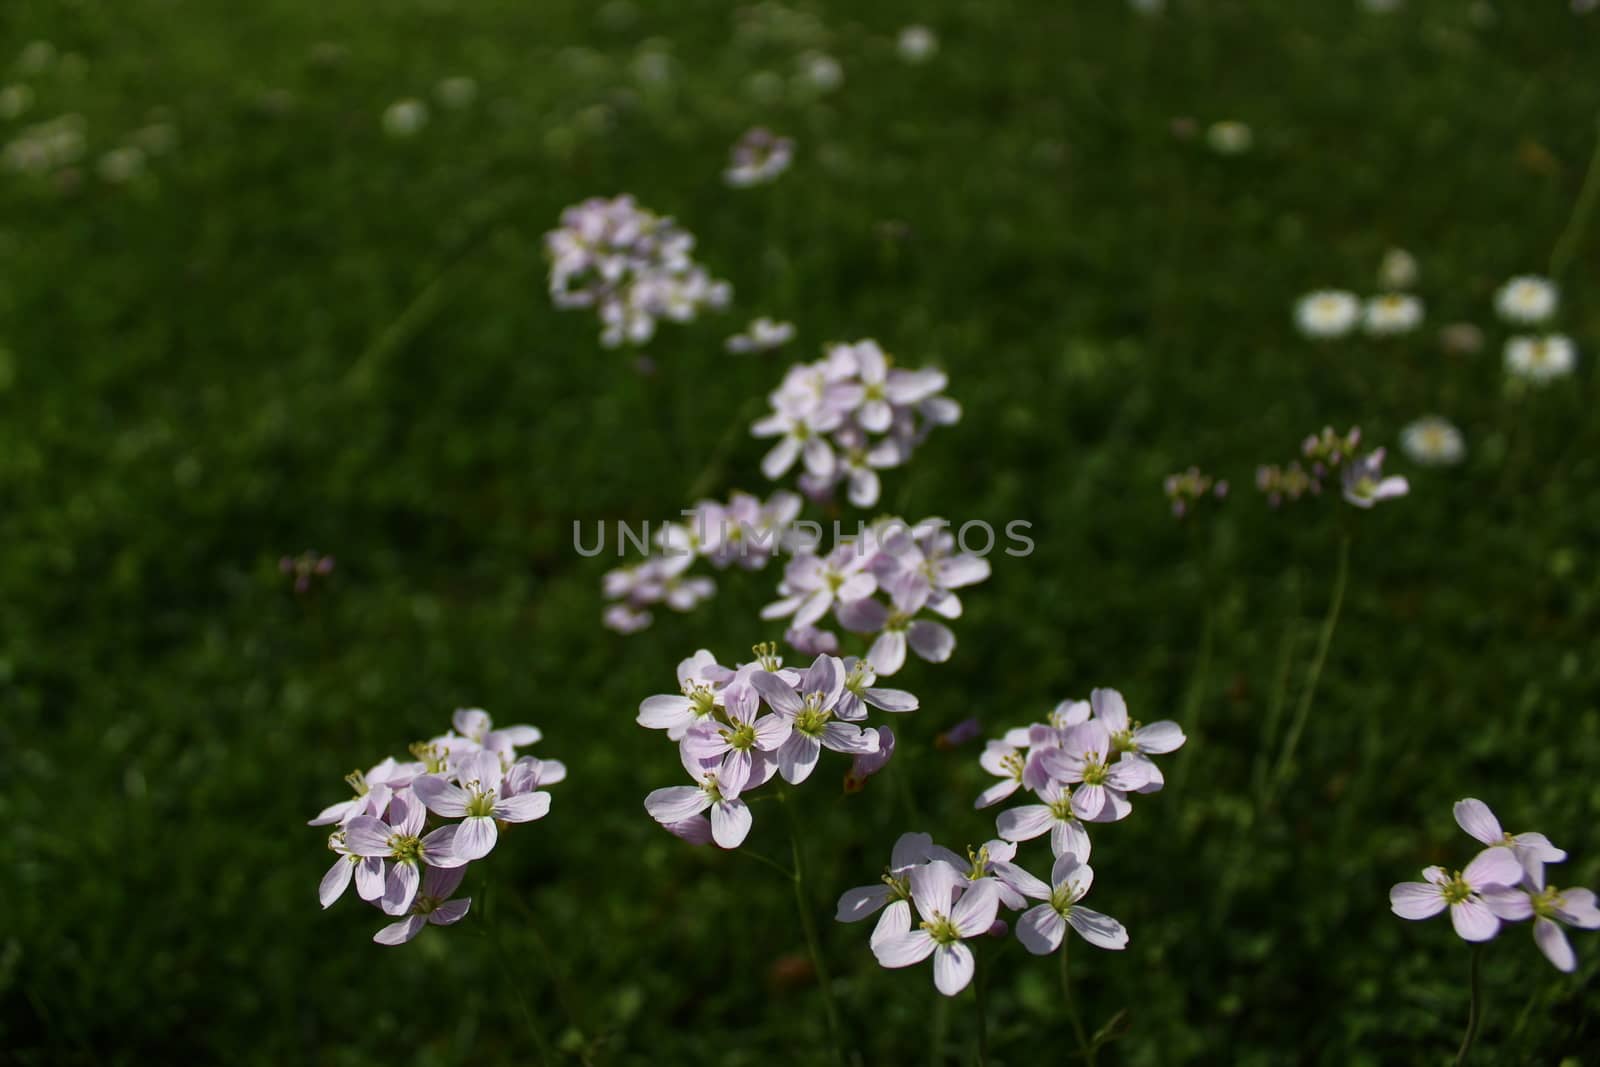 meadow with cuckoo flowers by martina_unbehauen